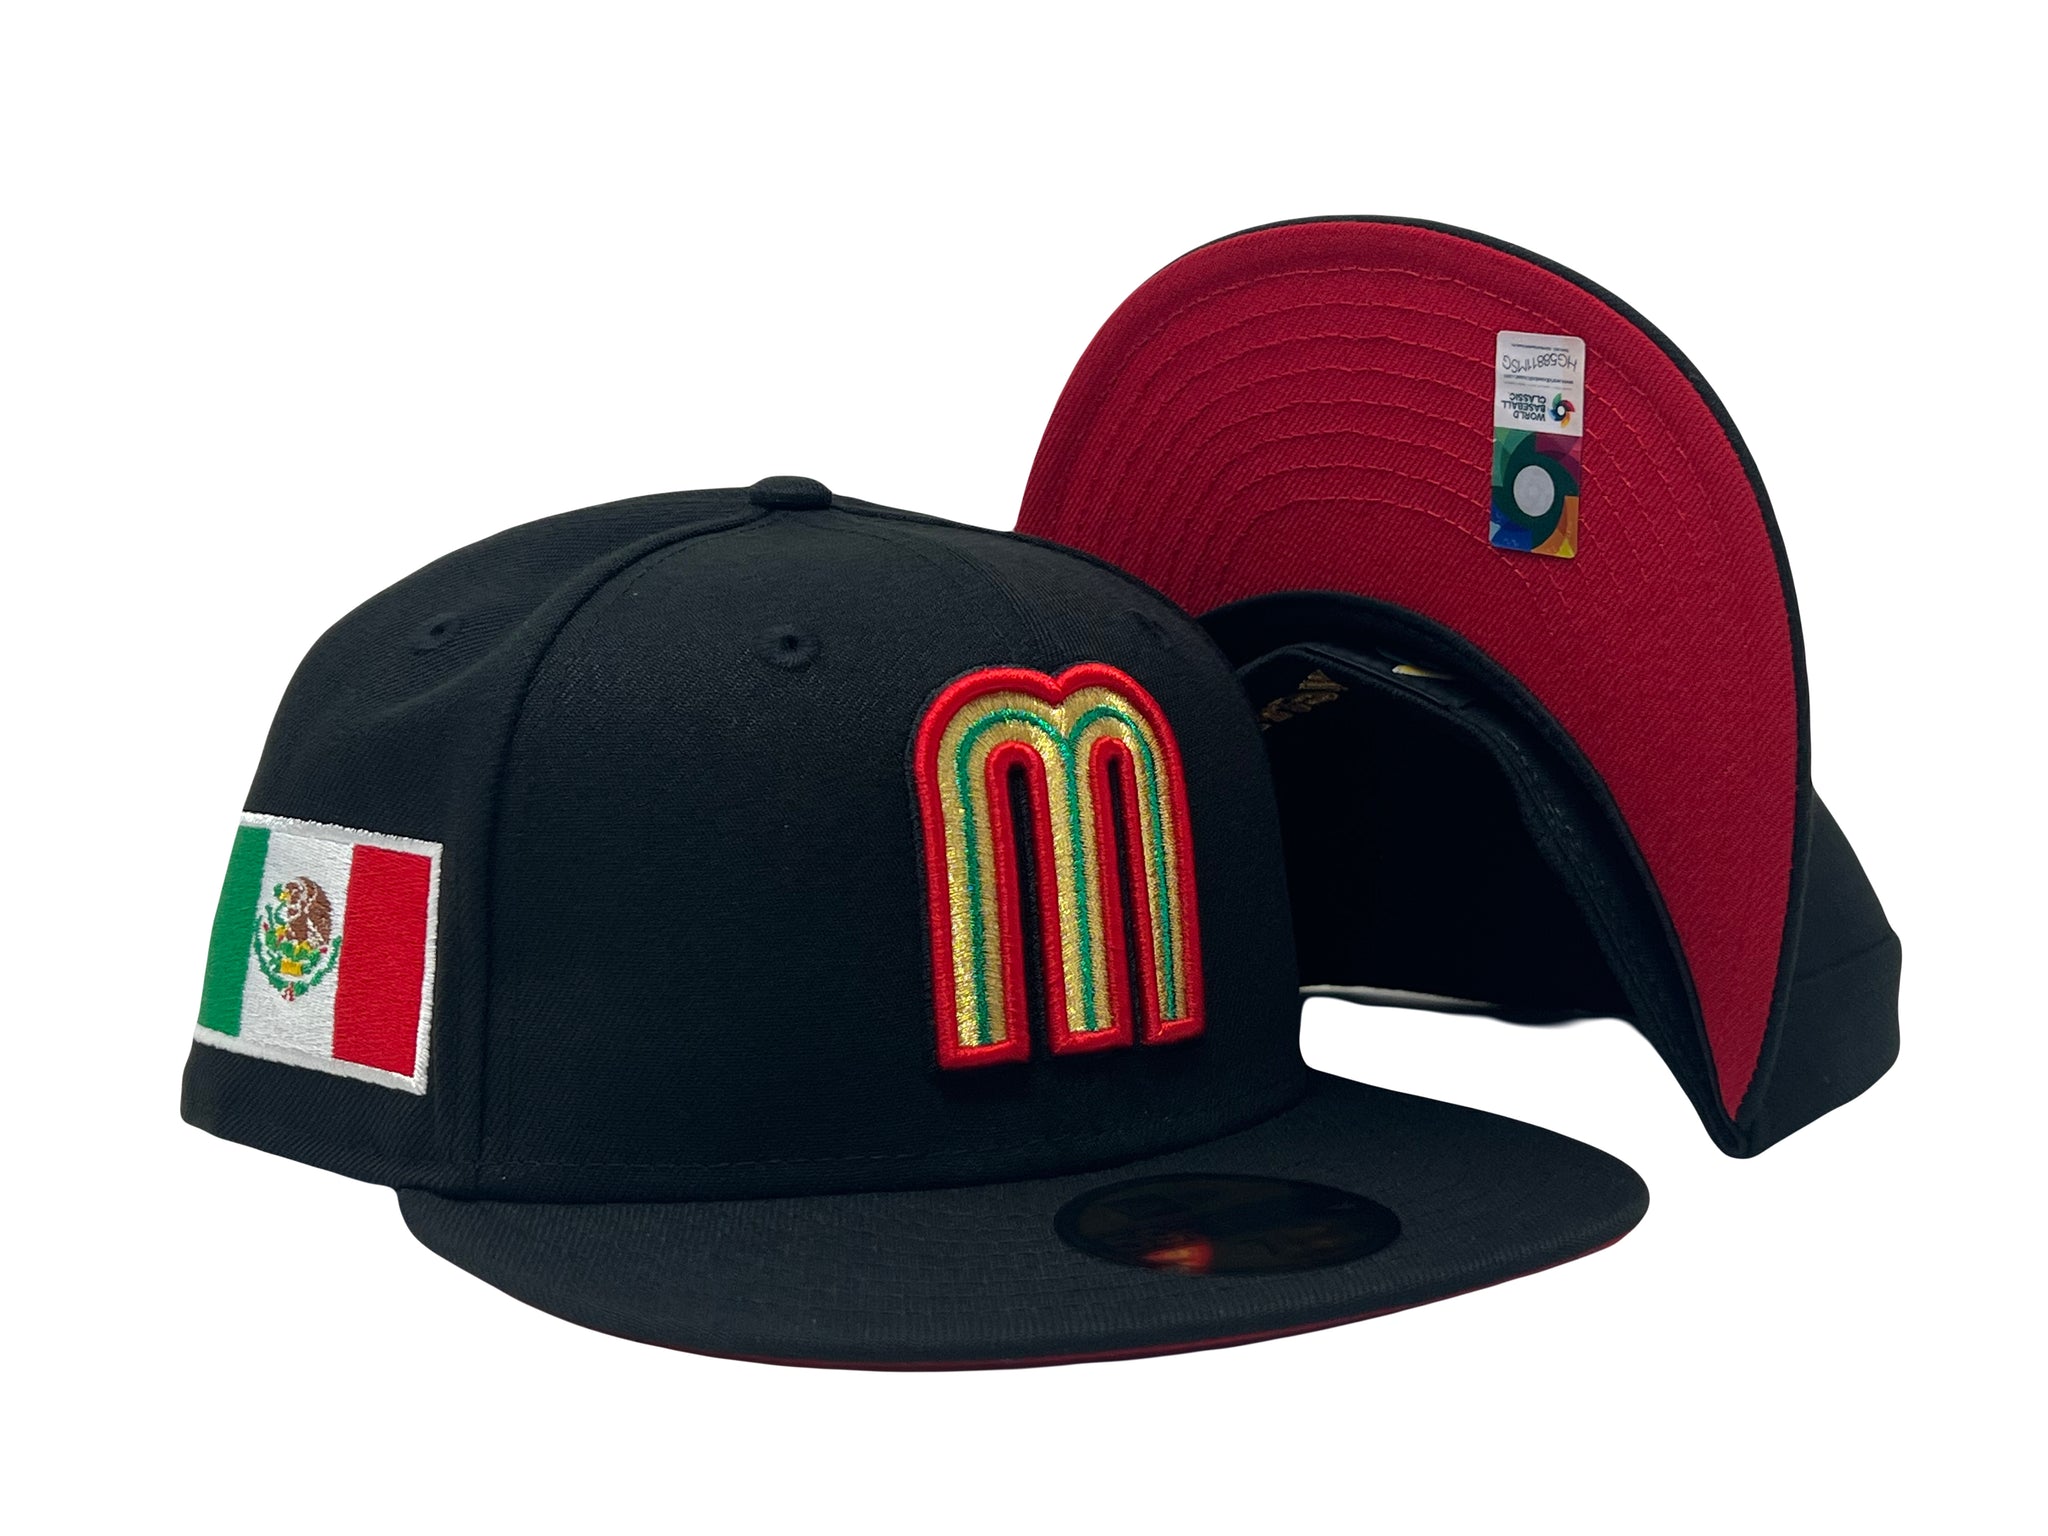 New Era 59FIFTY Mexico Wbc 2-Tone Brown/Red Fitted Hat 73/4